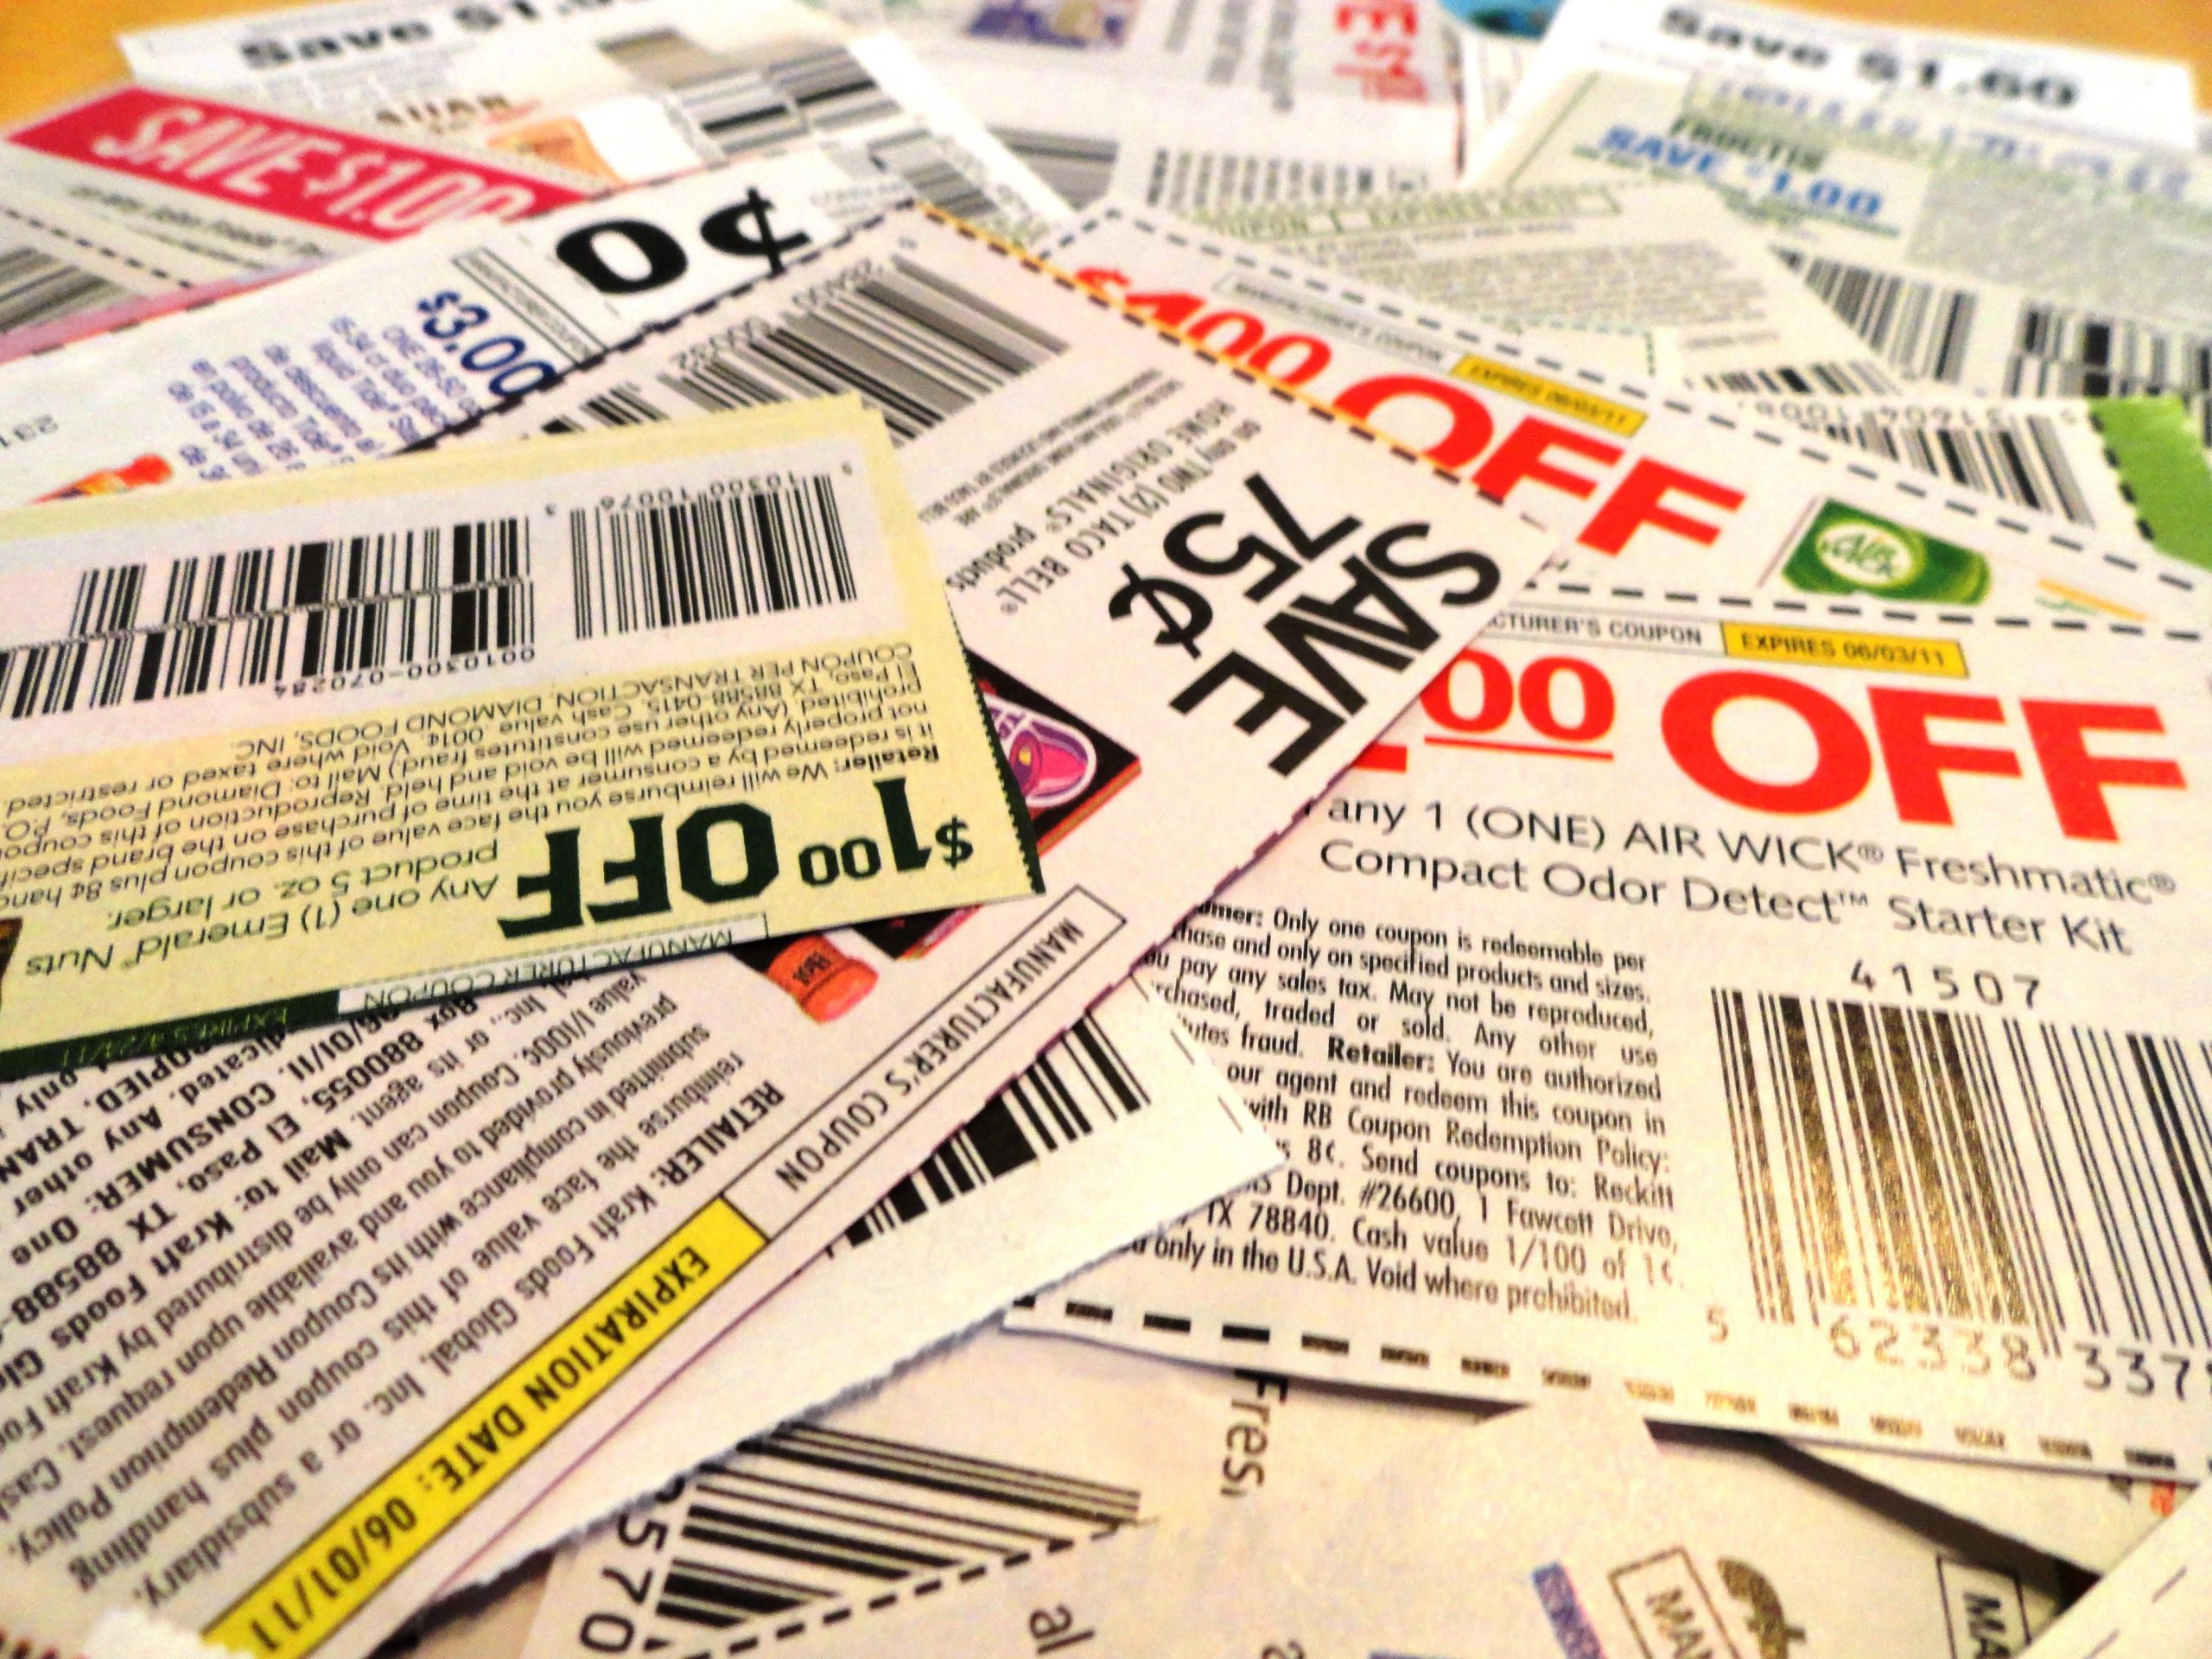 42 Companies That Will Send You Free Coupons by Mail